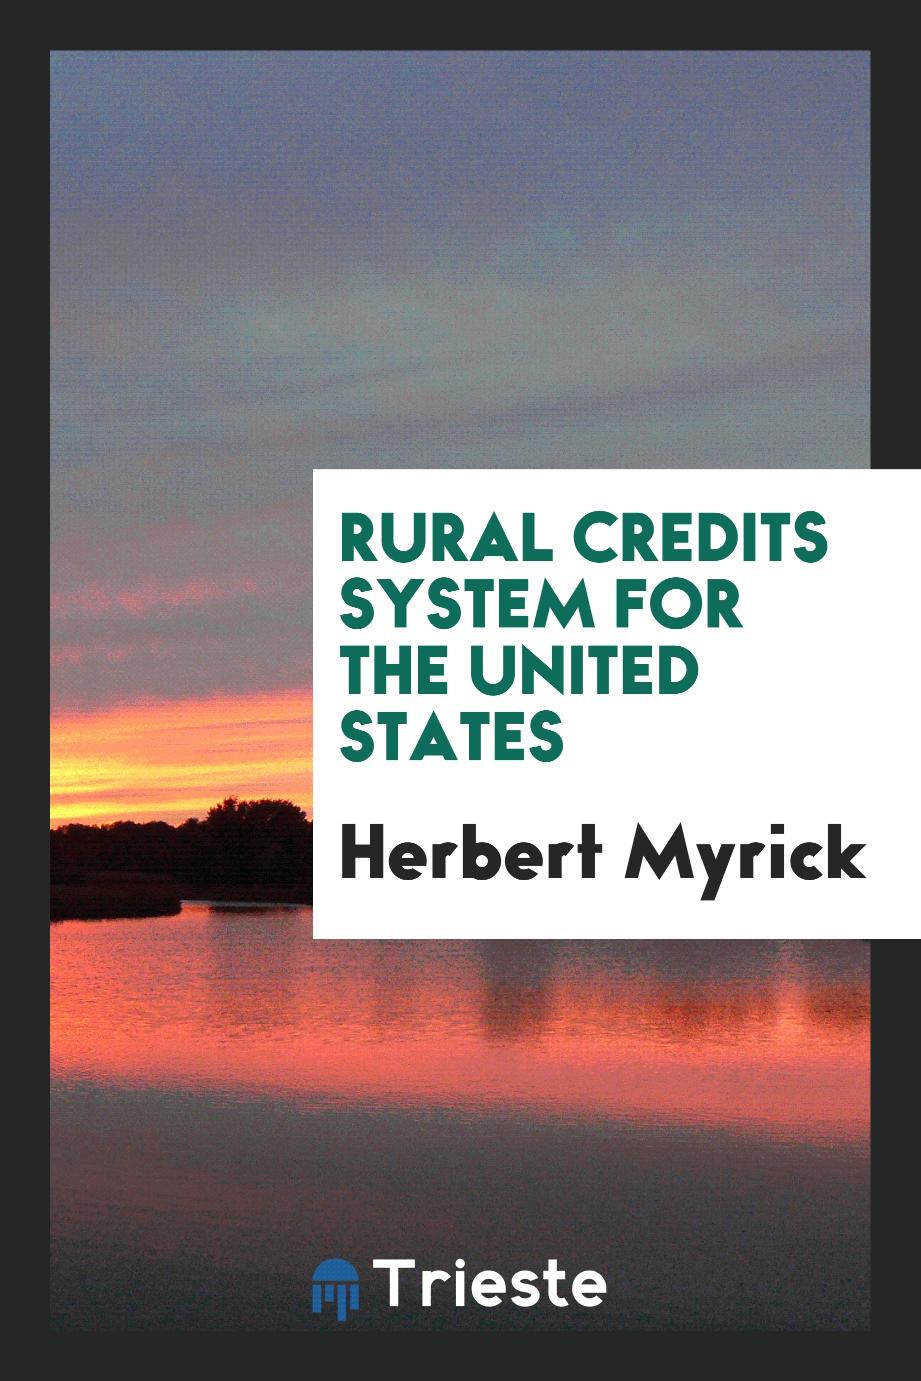 Rural Credits System for the United States